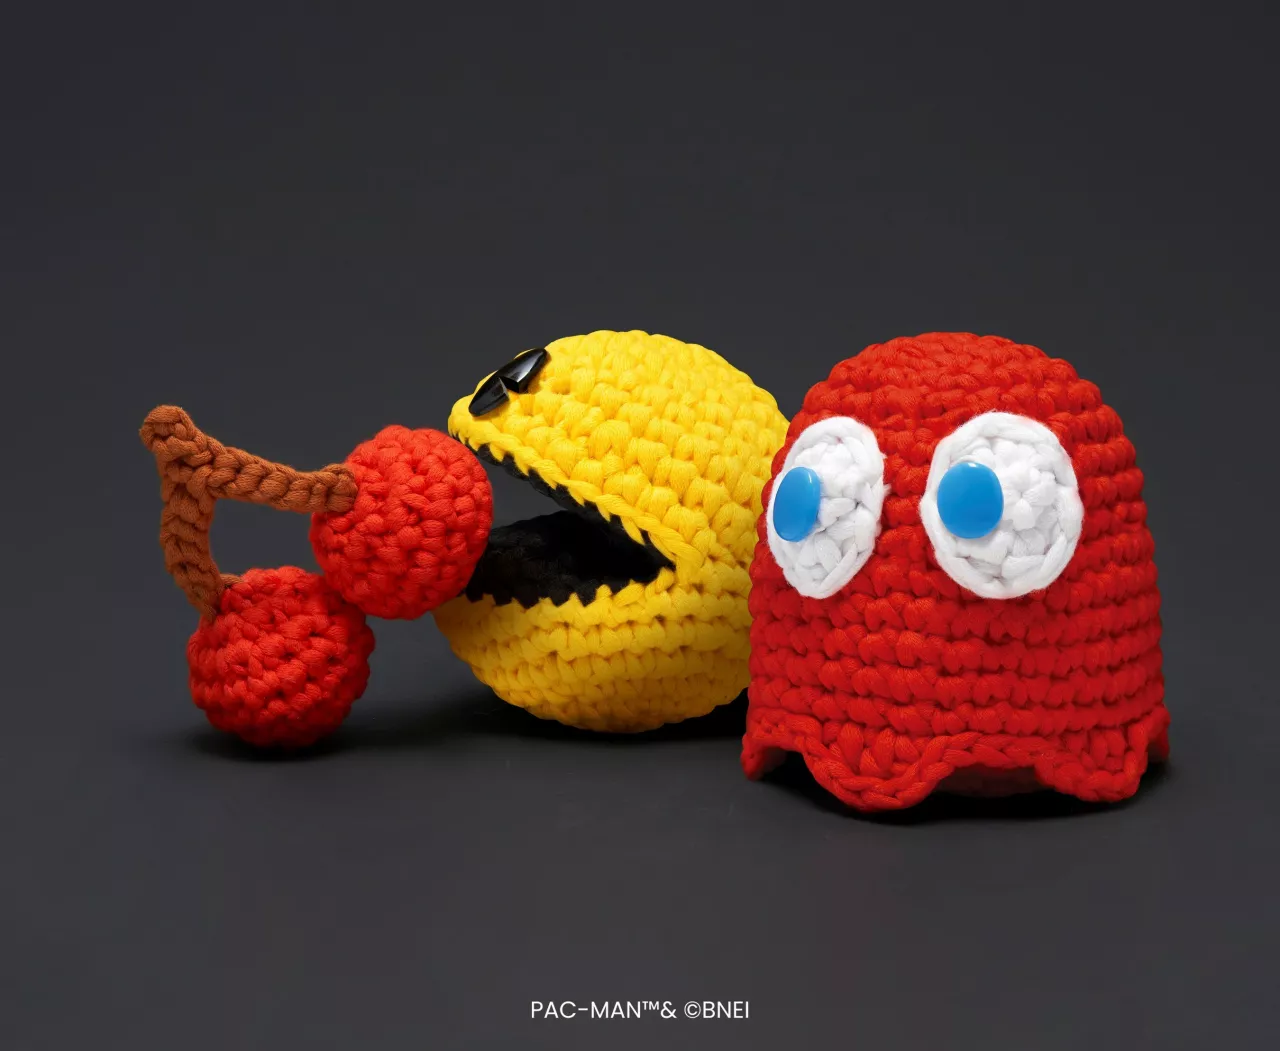 The PAC-MAN x The Woobles Collection allows crochet fans and PAC-MAN enthusiasts alike the opportunity to level up and bring the legendary video game characters to life through the art of crocheting. img#1